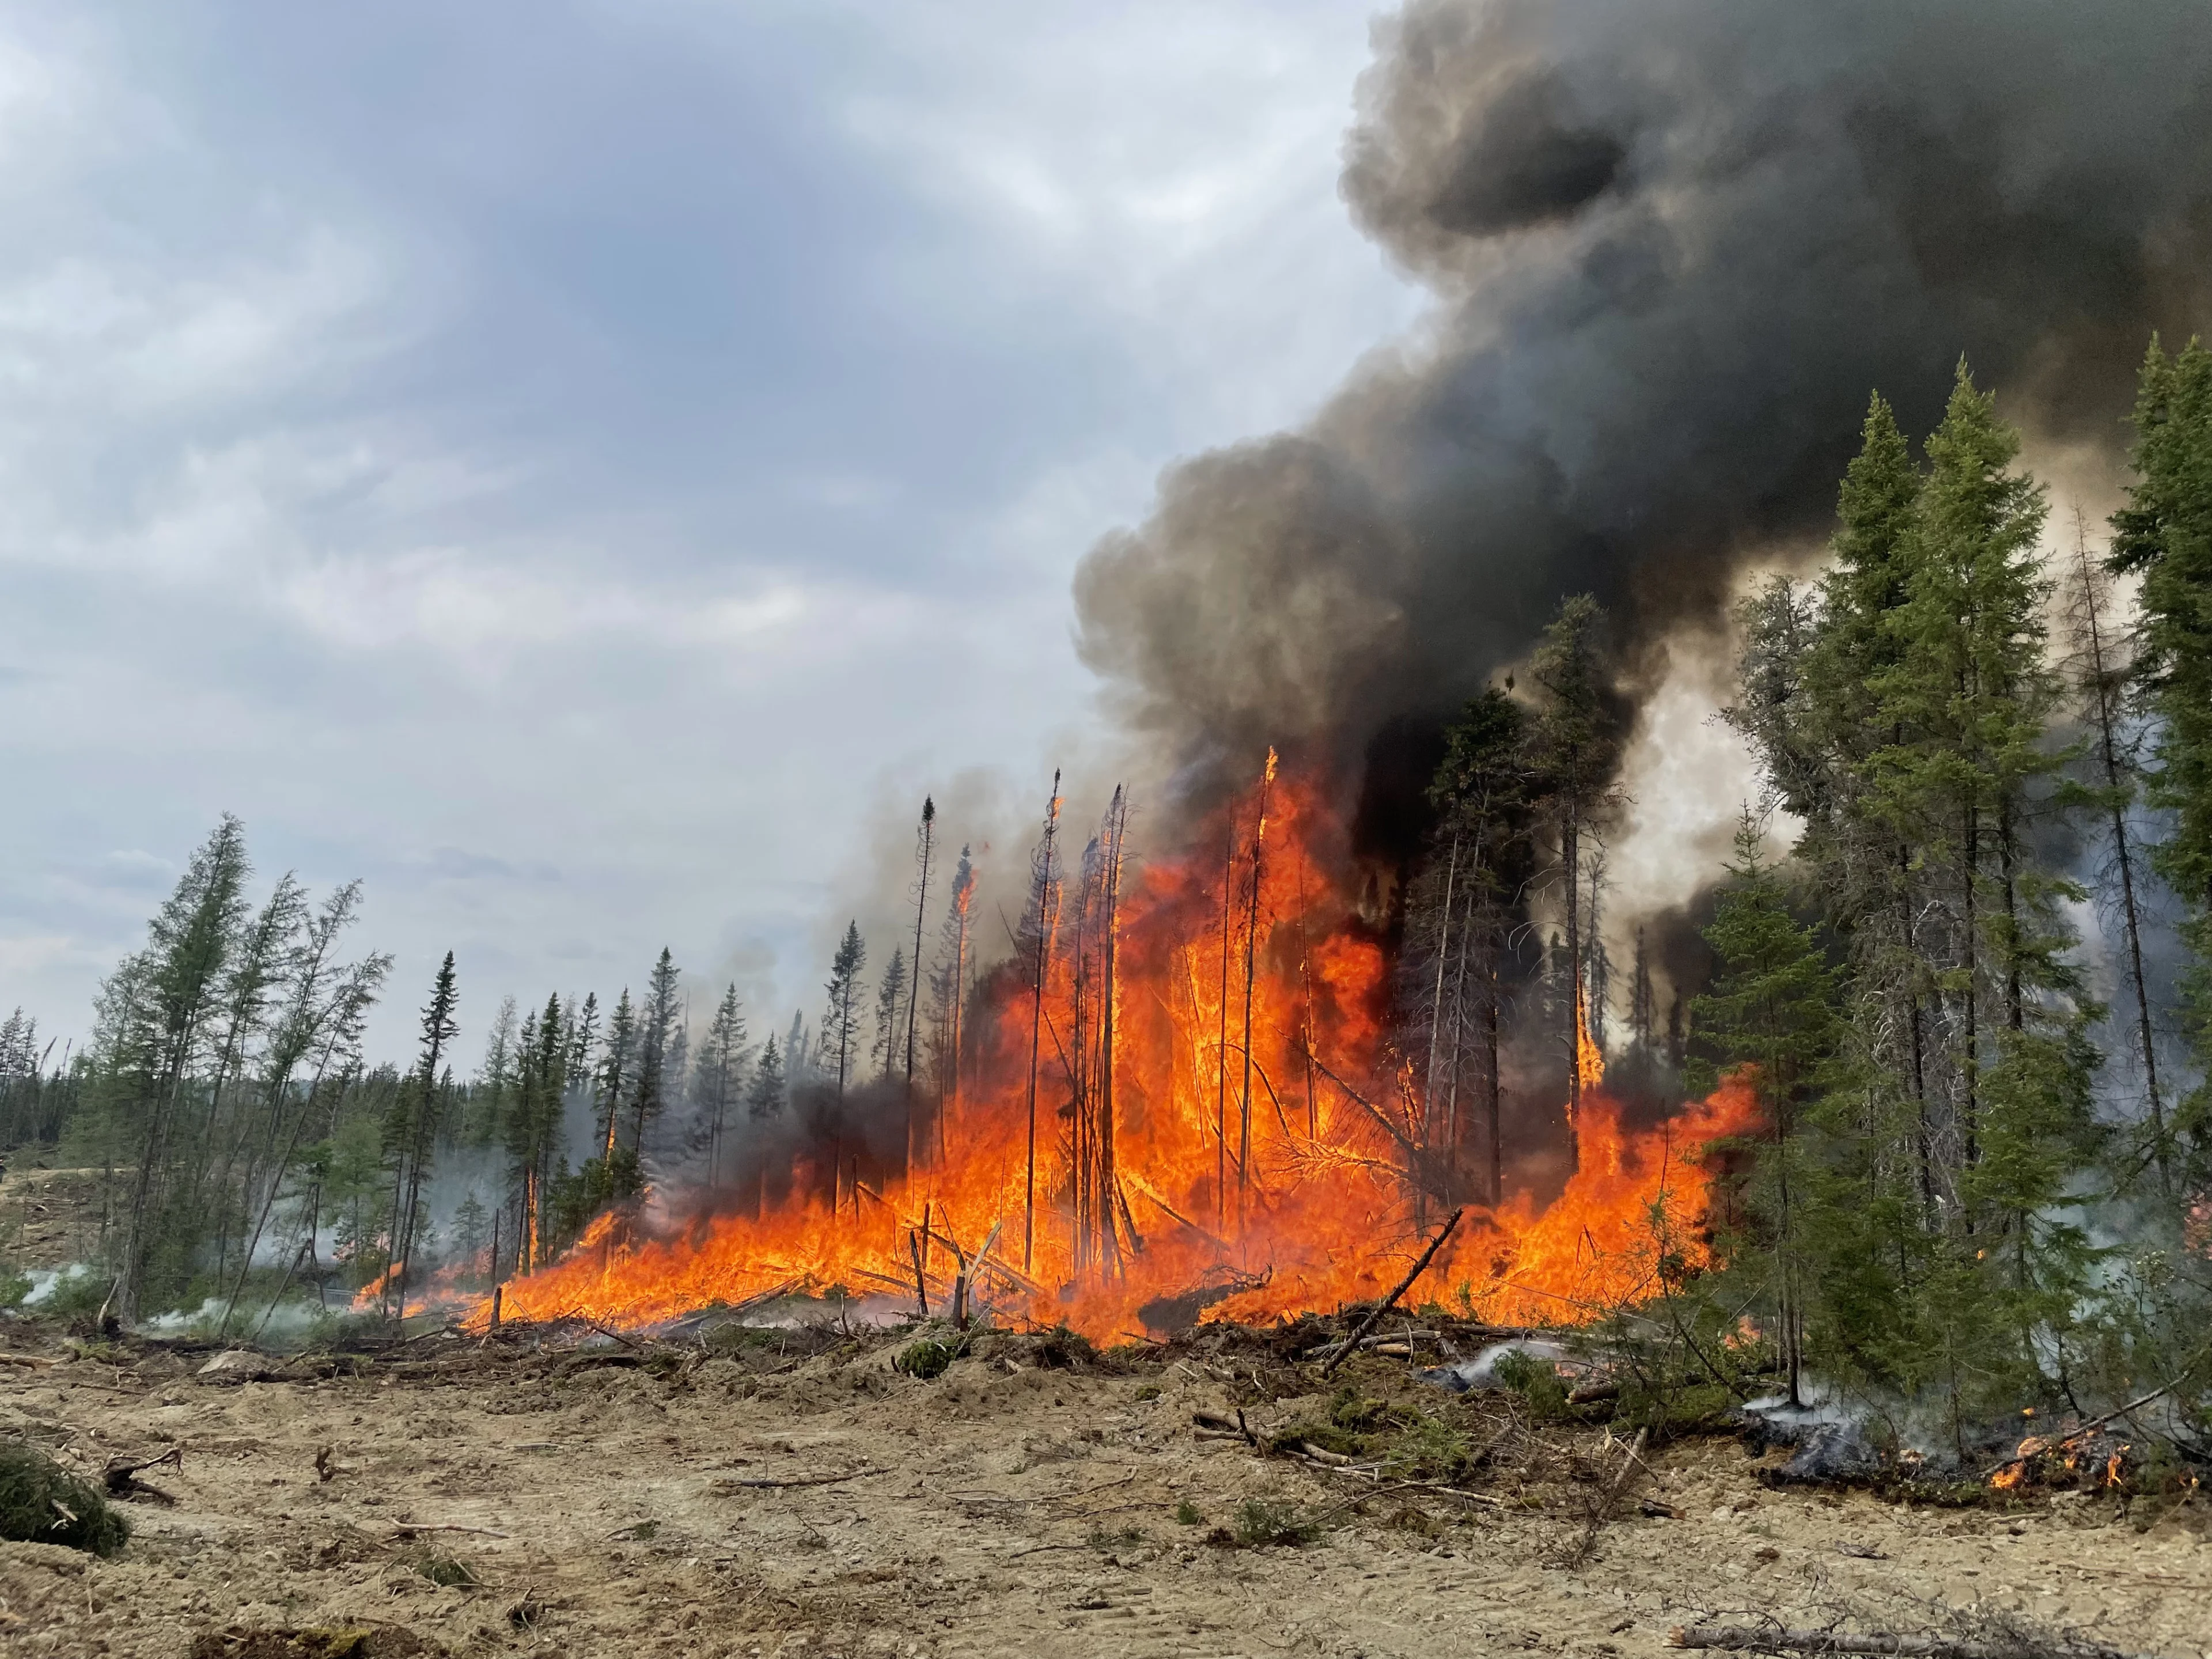 As wildfire risk grows, will planting trees work to offset carbon emissions?